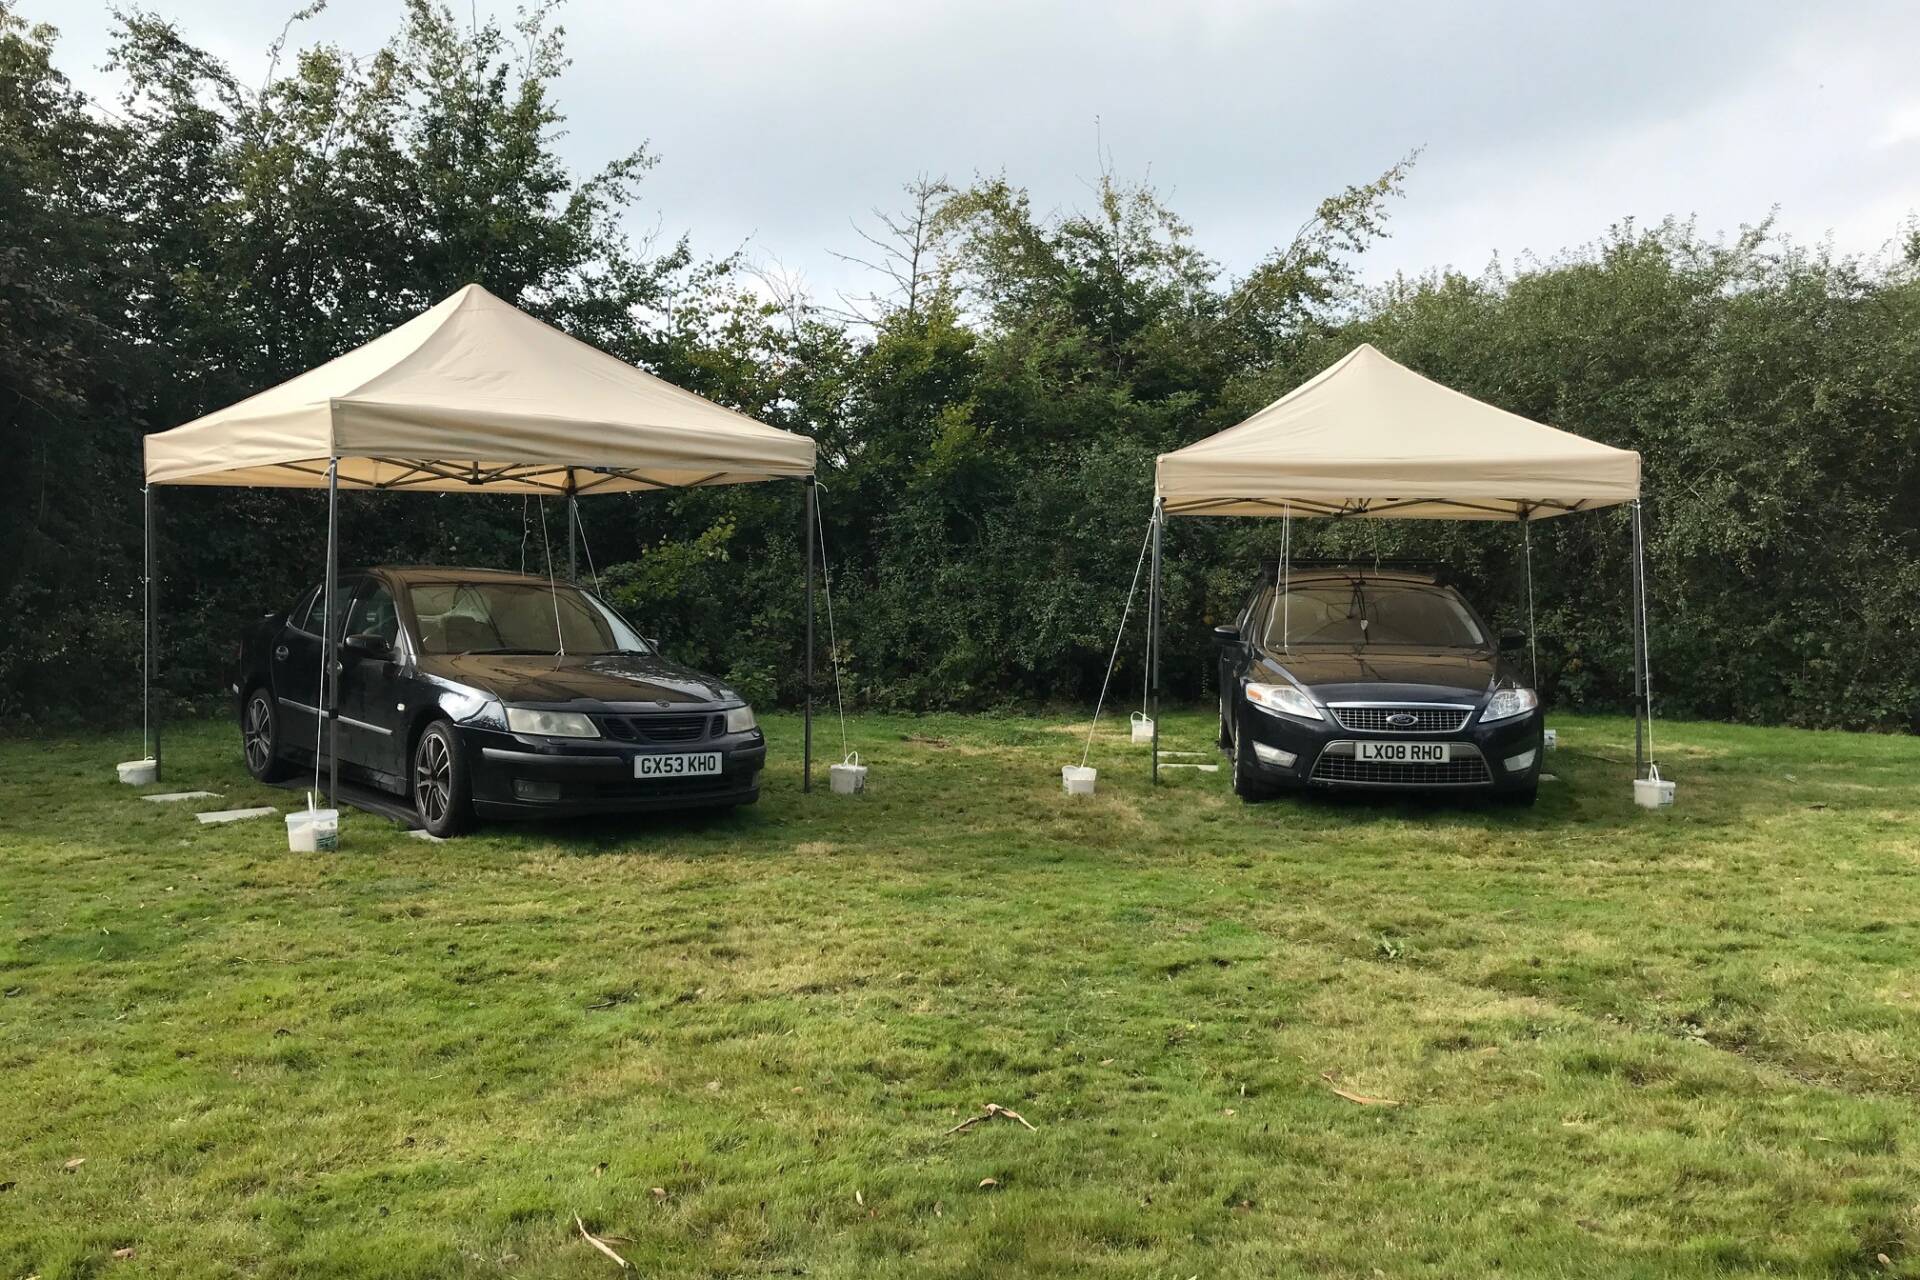 Two cars in a garden with tents over them